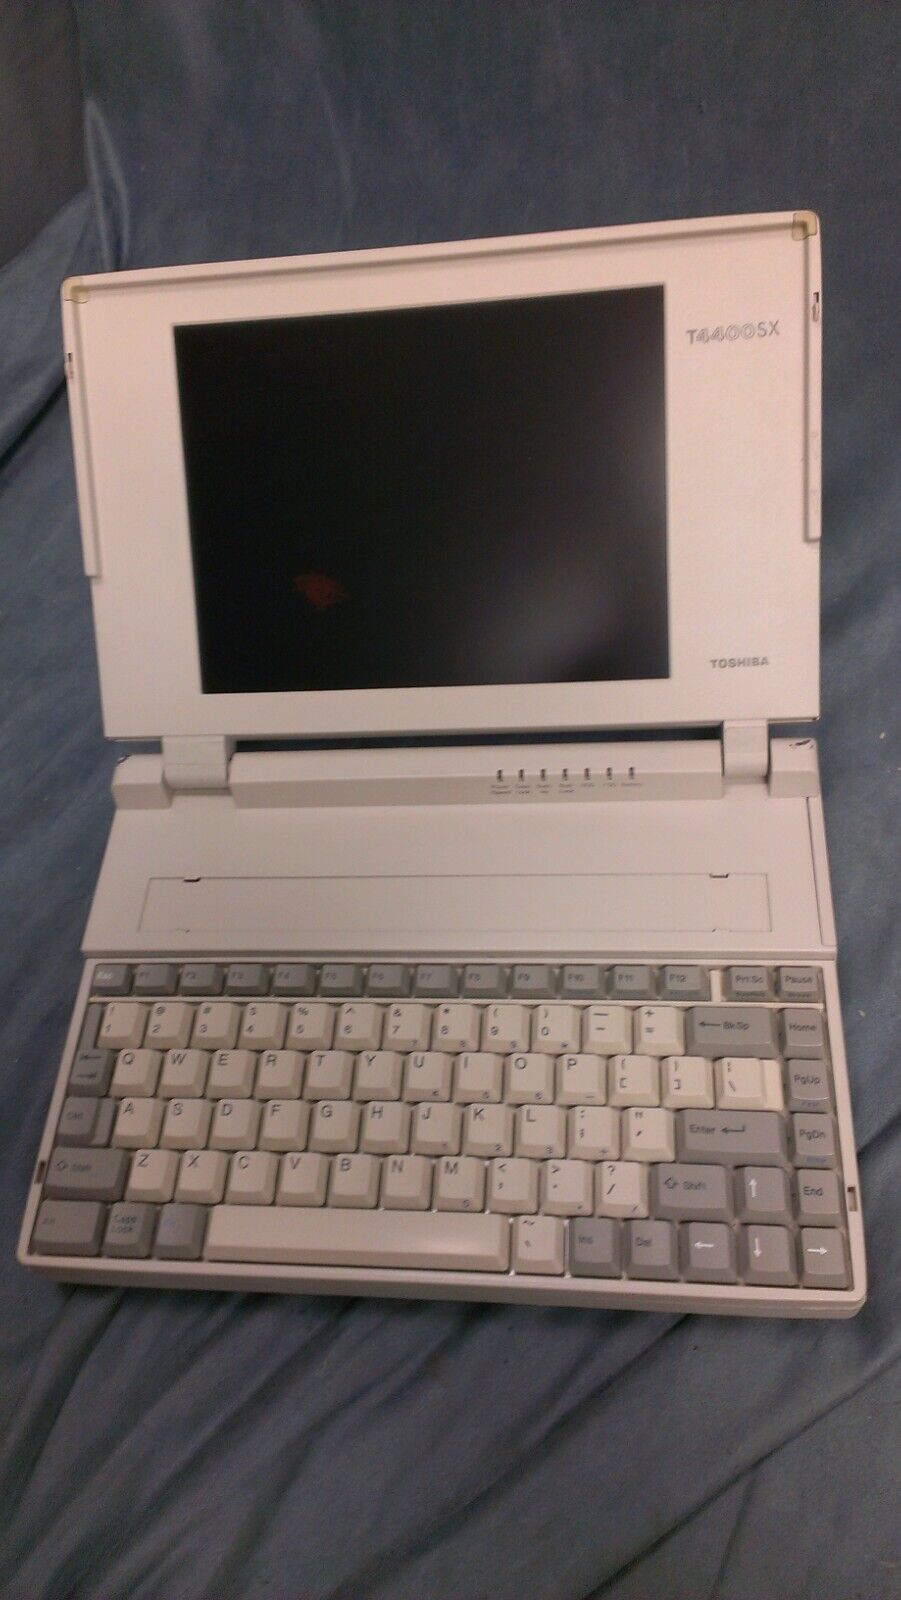 Vintage 1980s Toshiba T4400SX Portable Computer Luggable Laptop UNTESTED AS IS